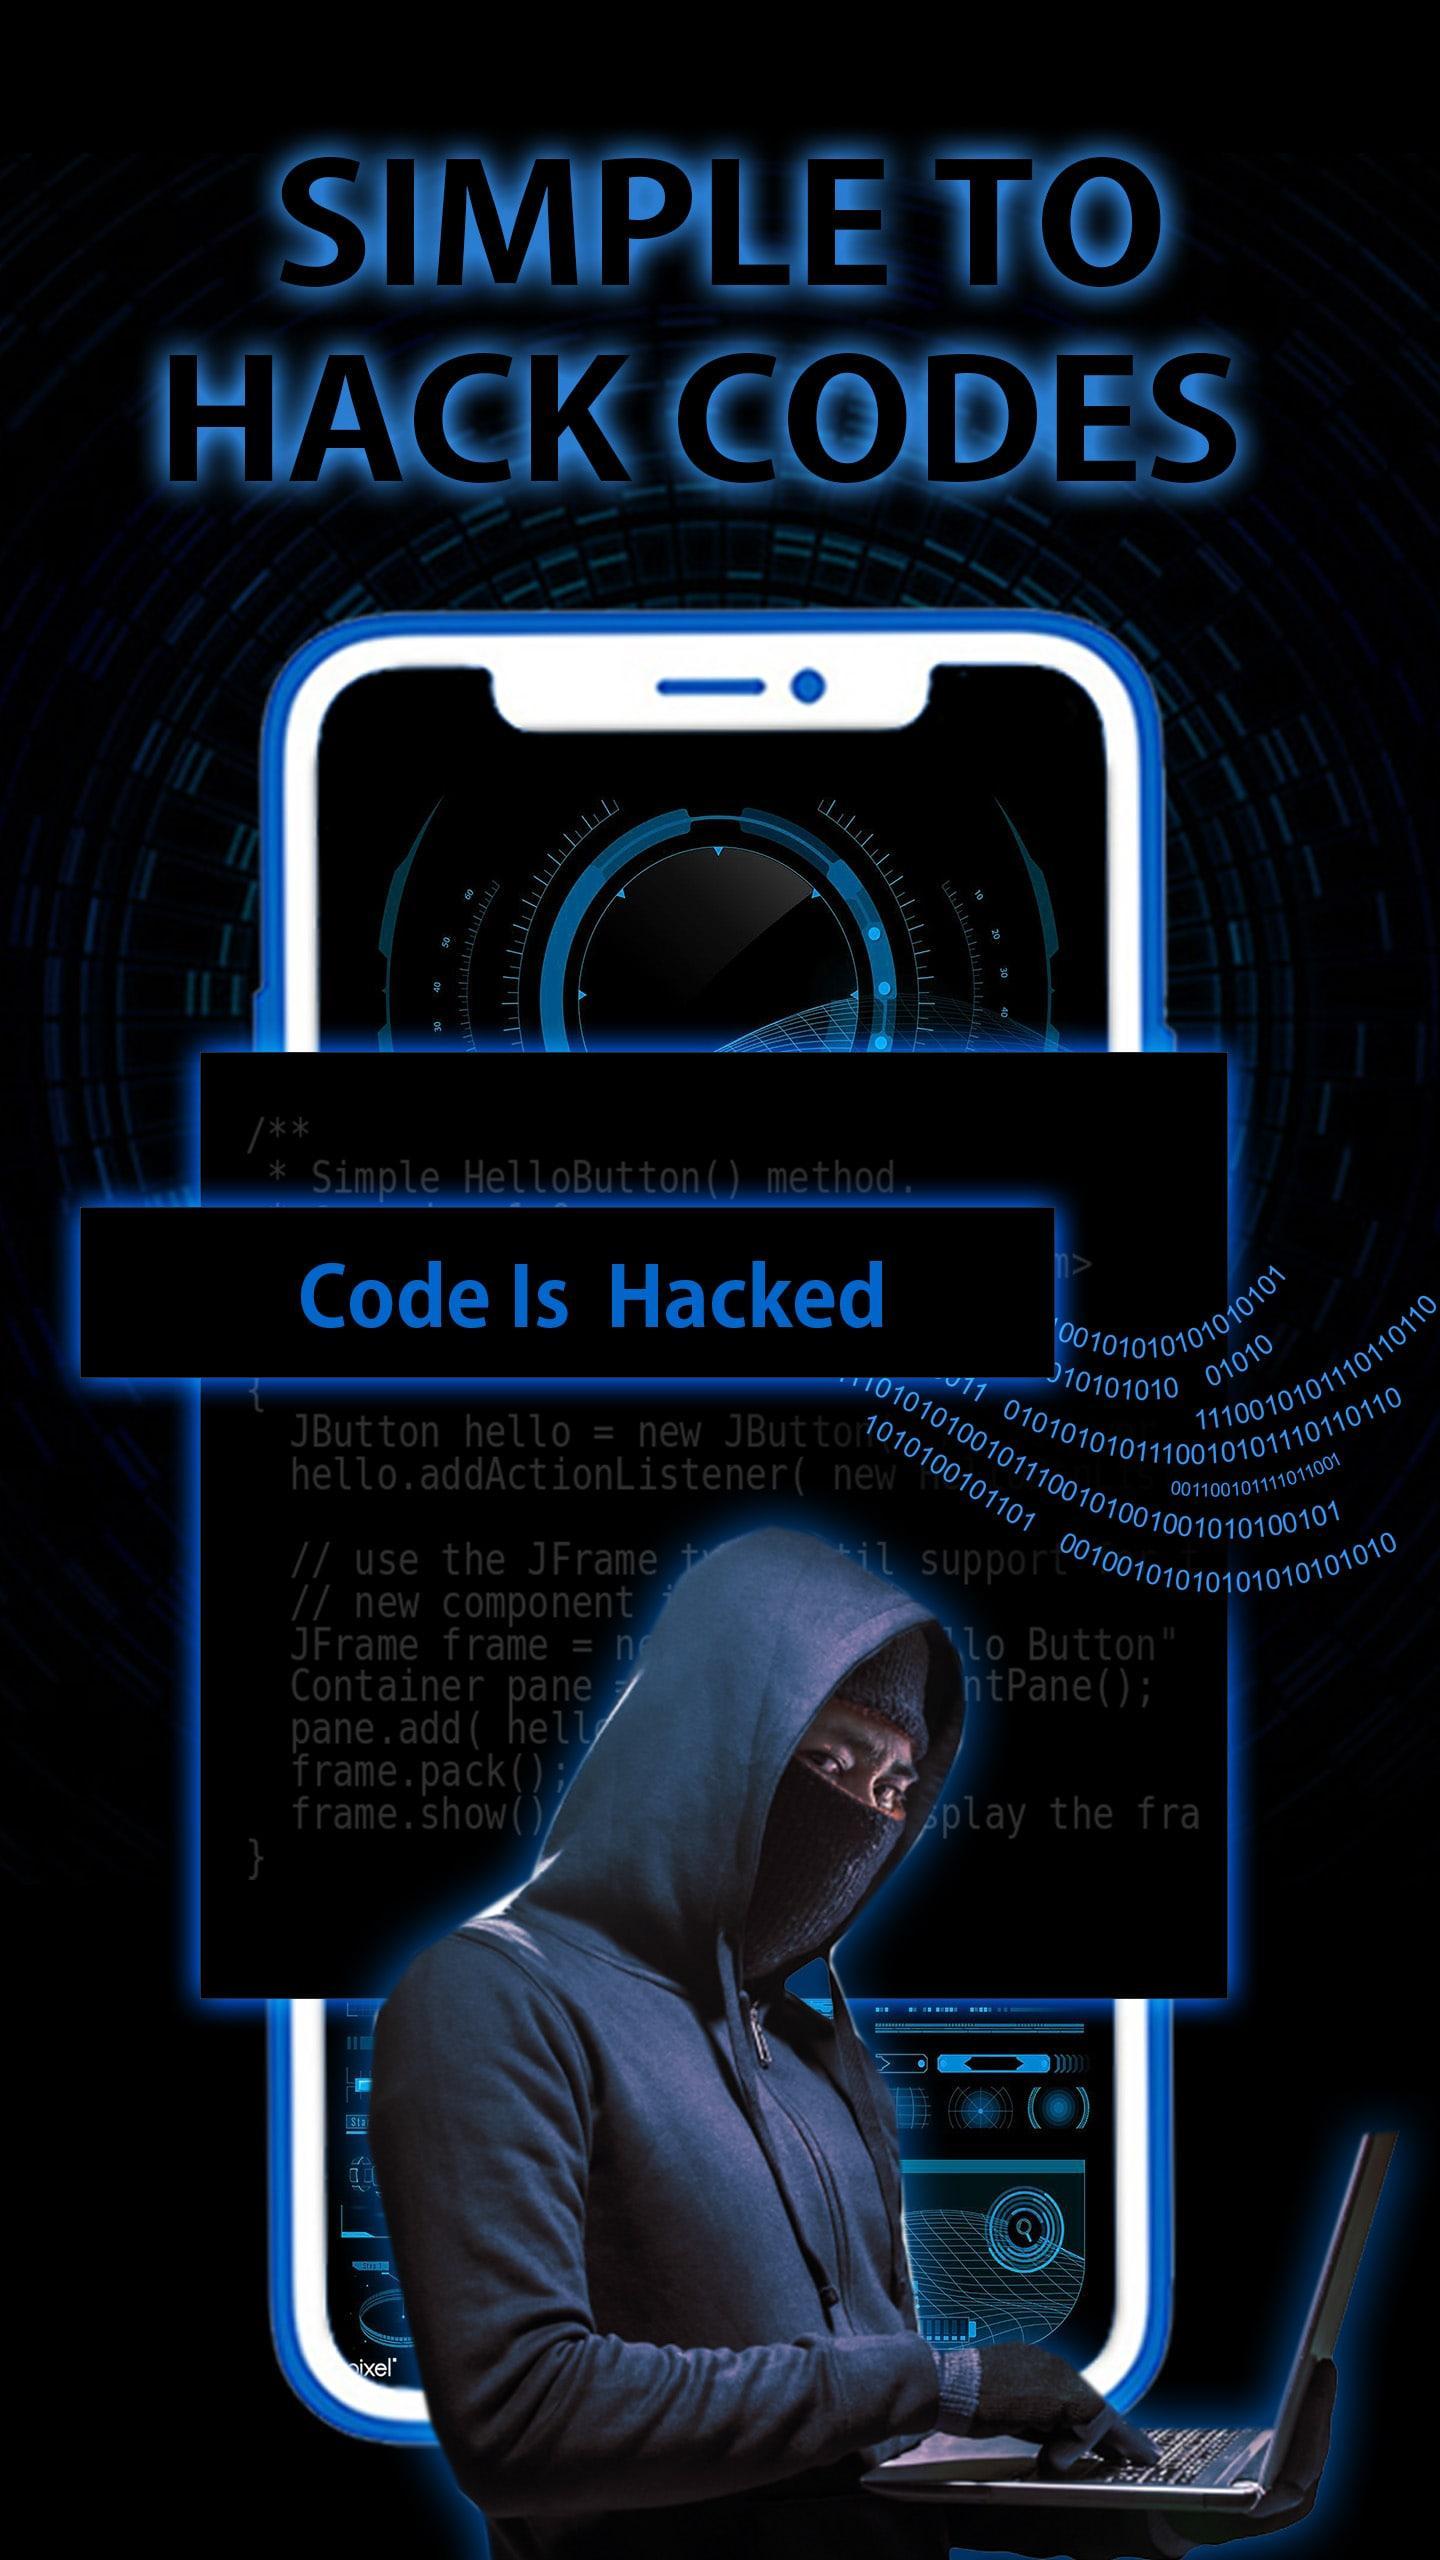 Download Wifi Password Hacker Prank for android 4.1.2